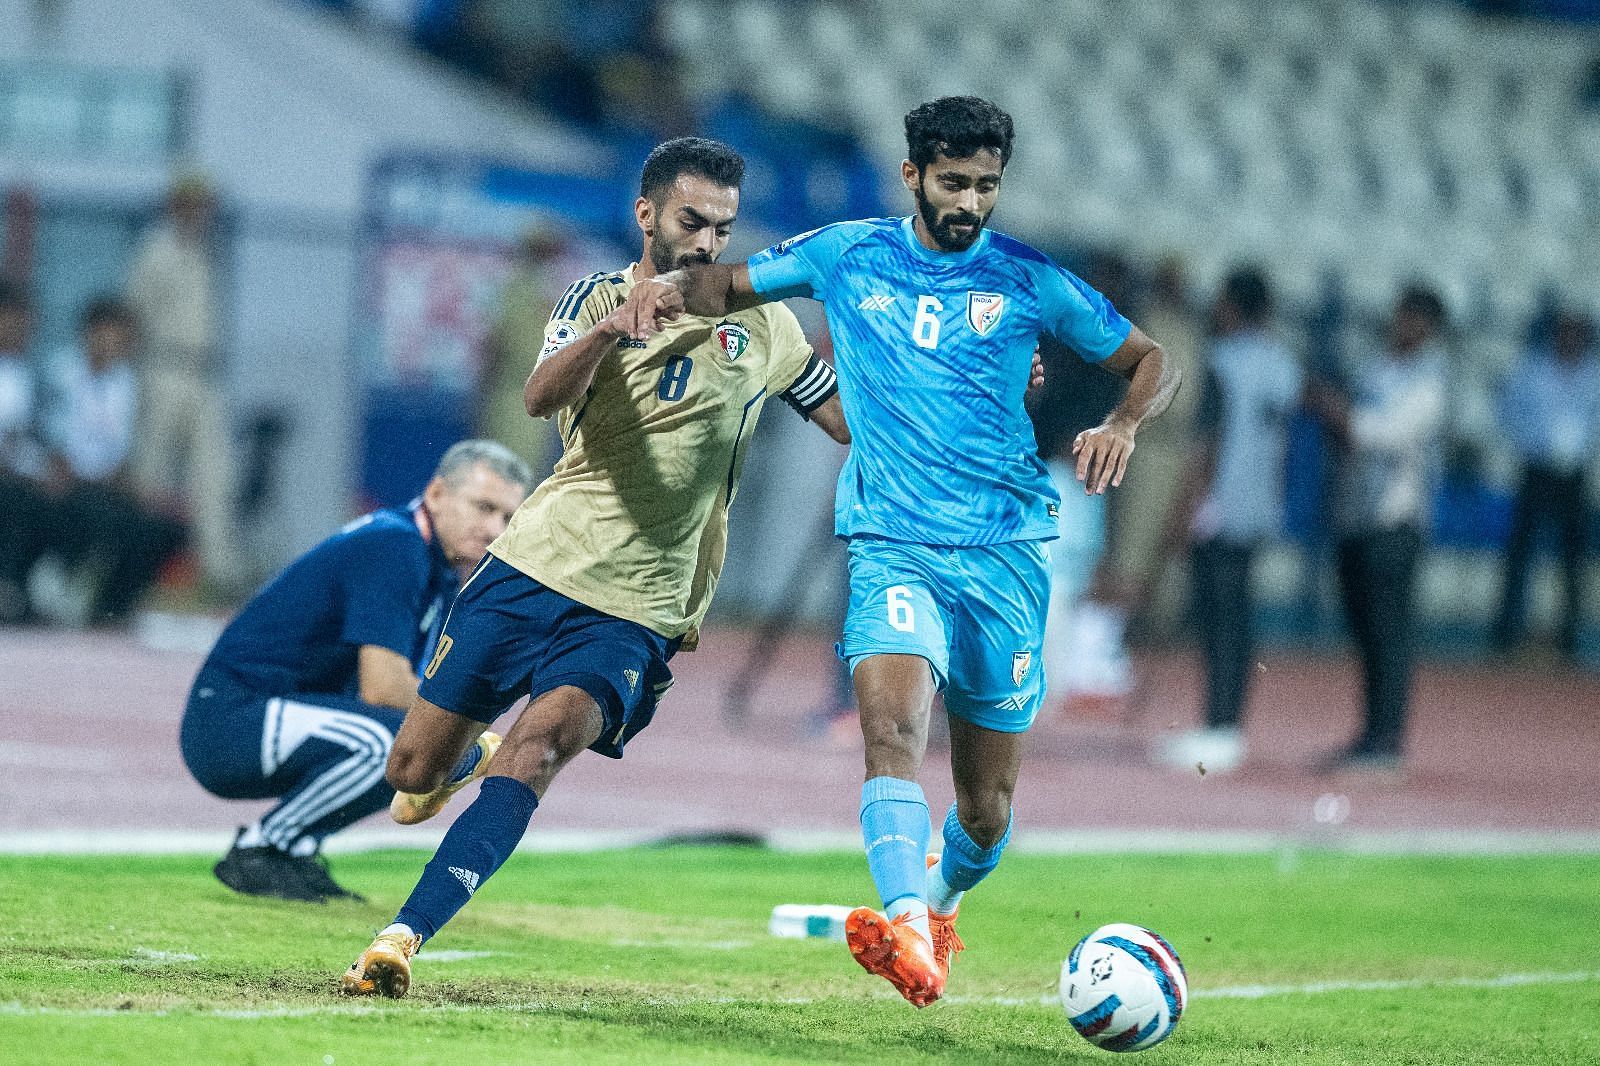 Akash Mishra has been rock solid as the left back of this side (Image courtesy: AIFF Media)